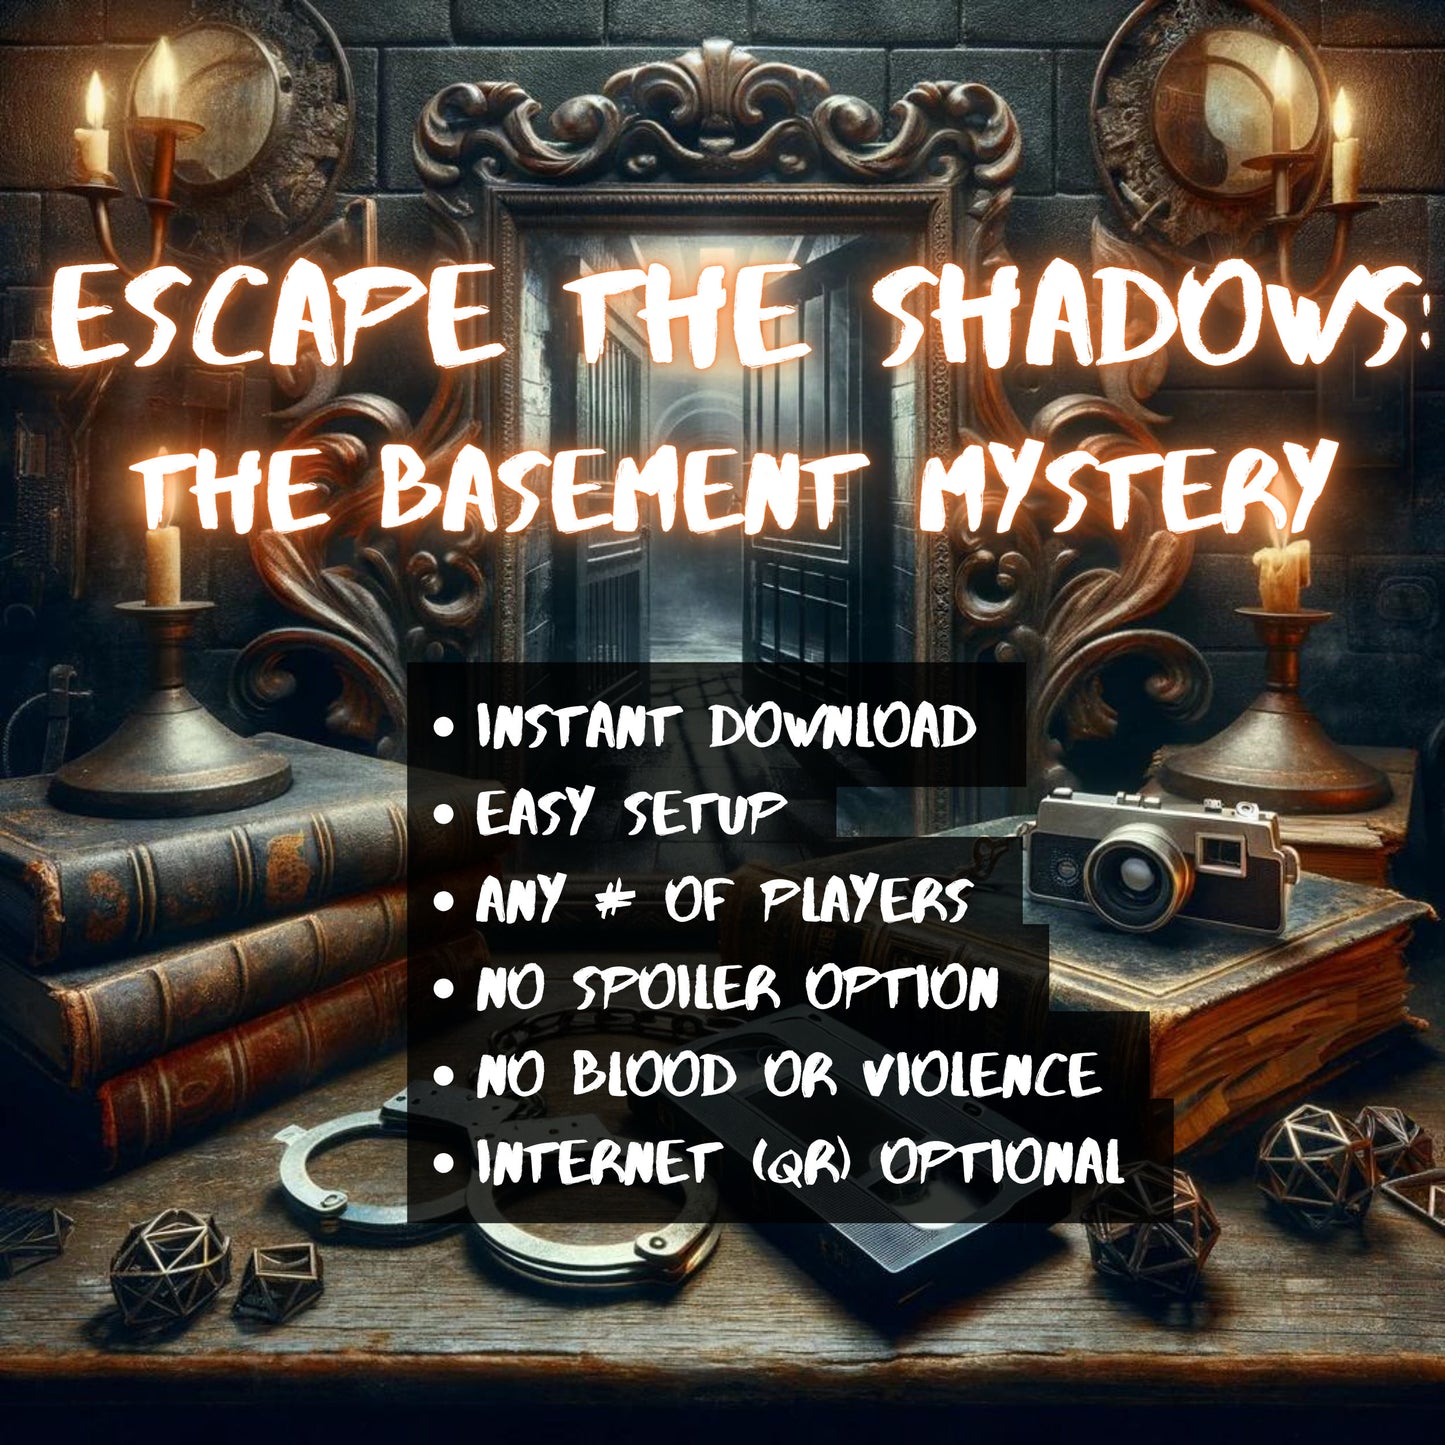 Escape the Shadows: The Basement Mystery Family-Friendly Escape Room Instant Download Mysterious Escape Room Party Game. Game Night Activity